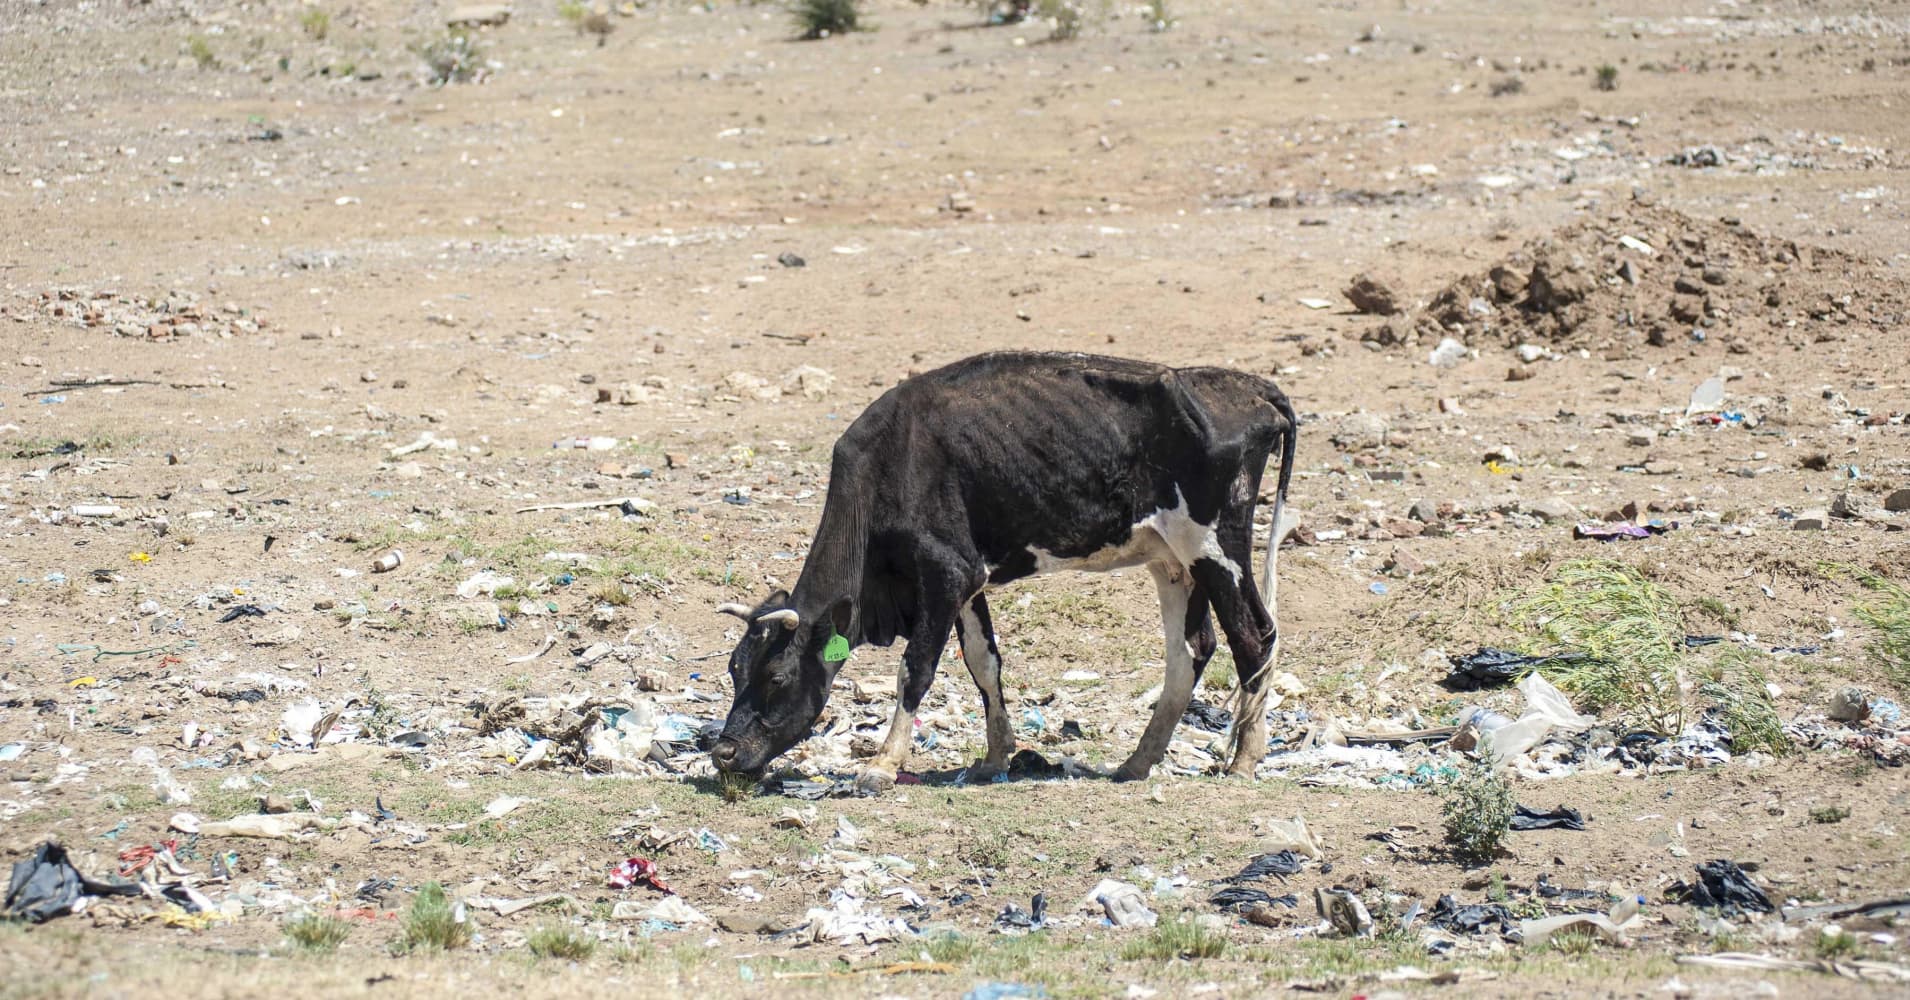 Livestock in Free State, South Africa are struggling to find water due to the drought.